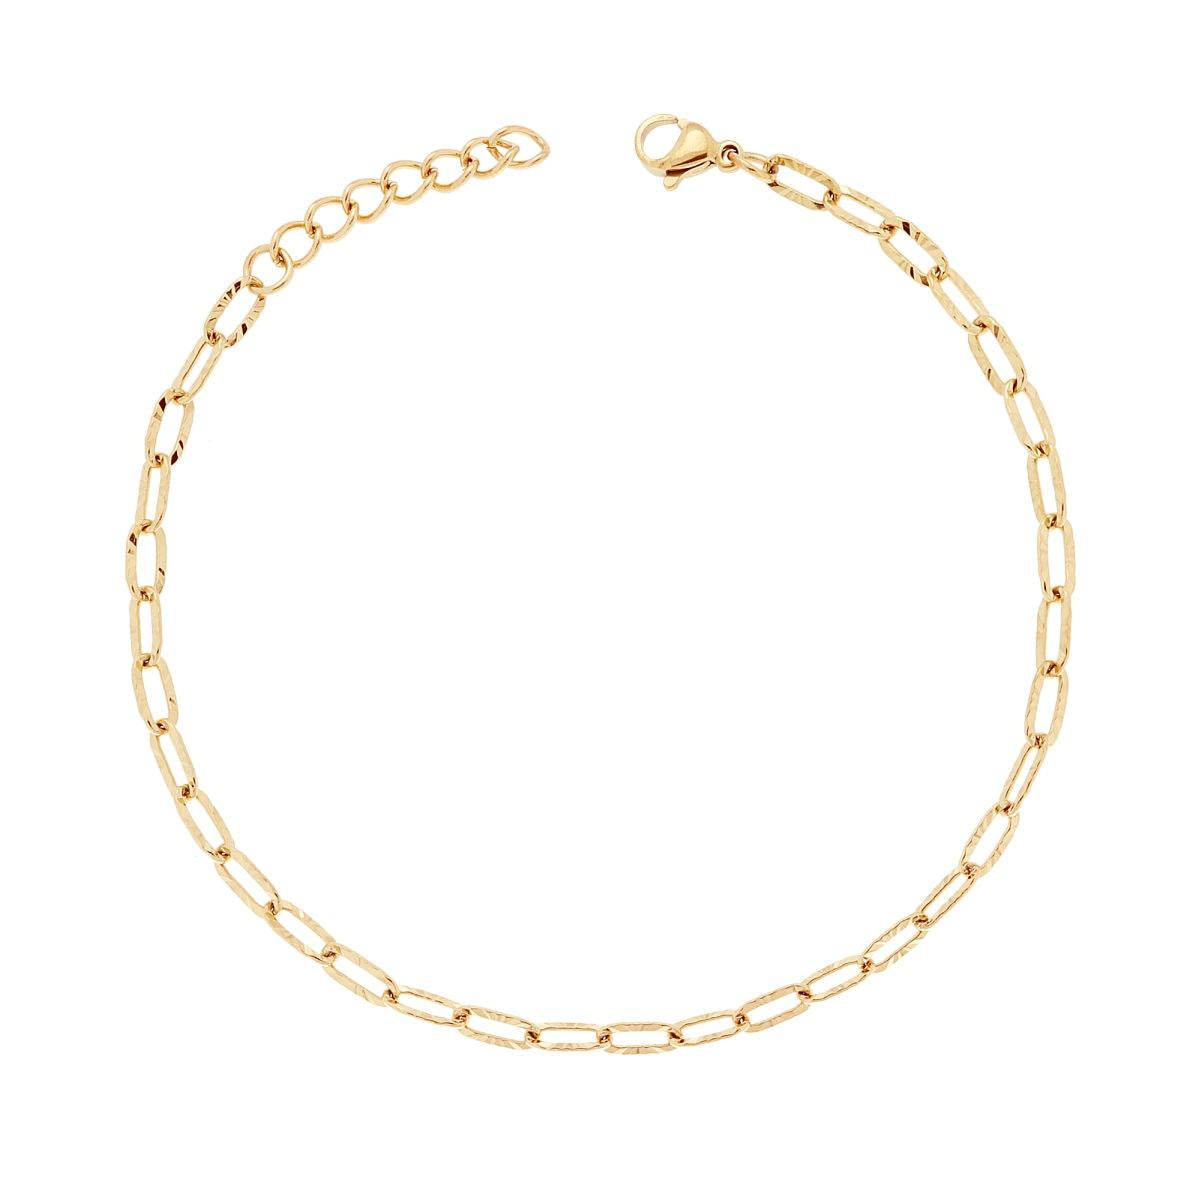 Gold chain link Anklet